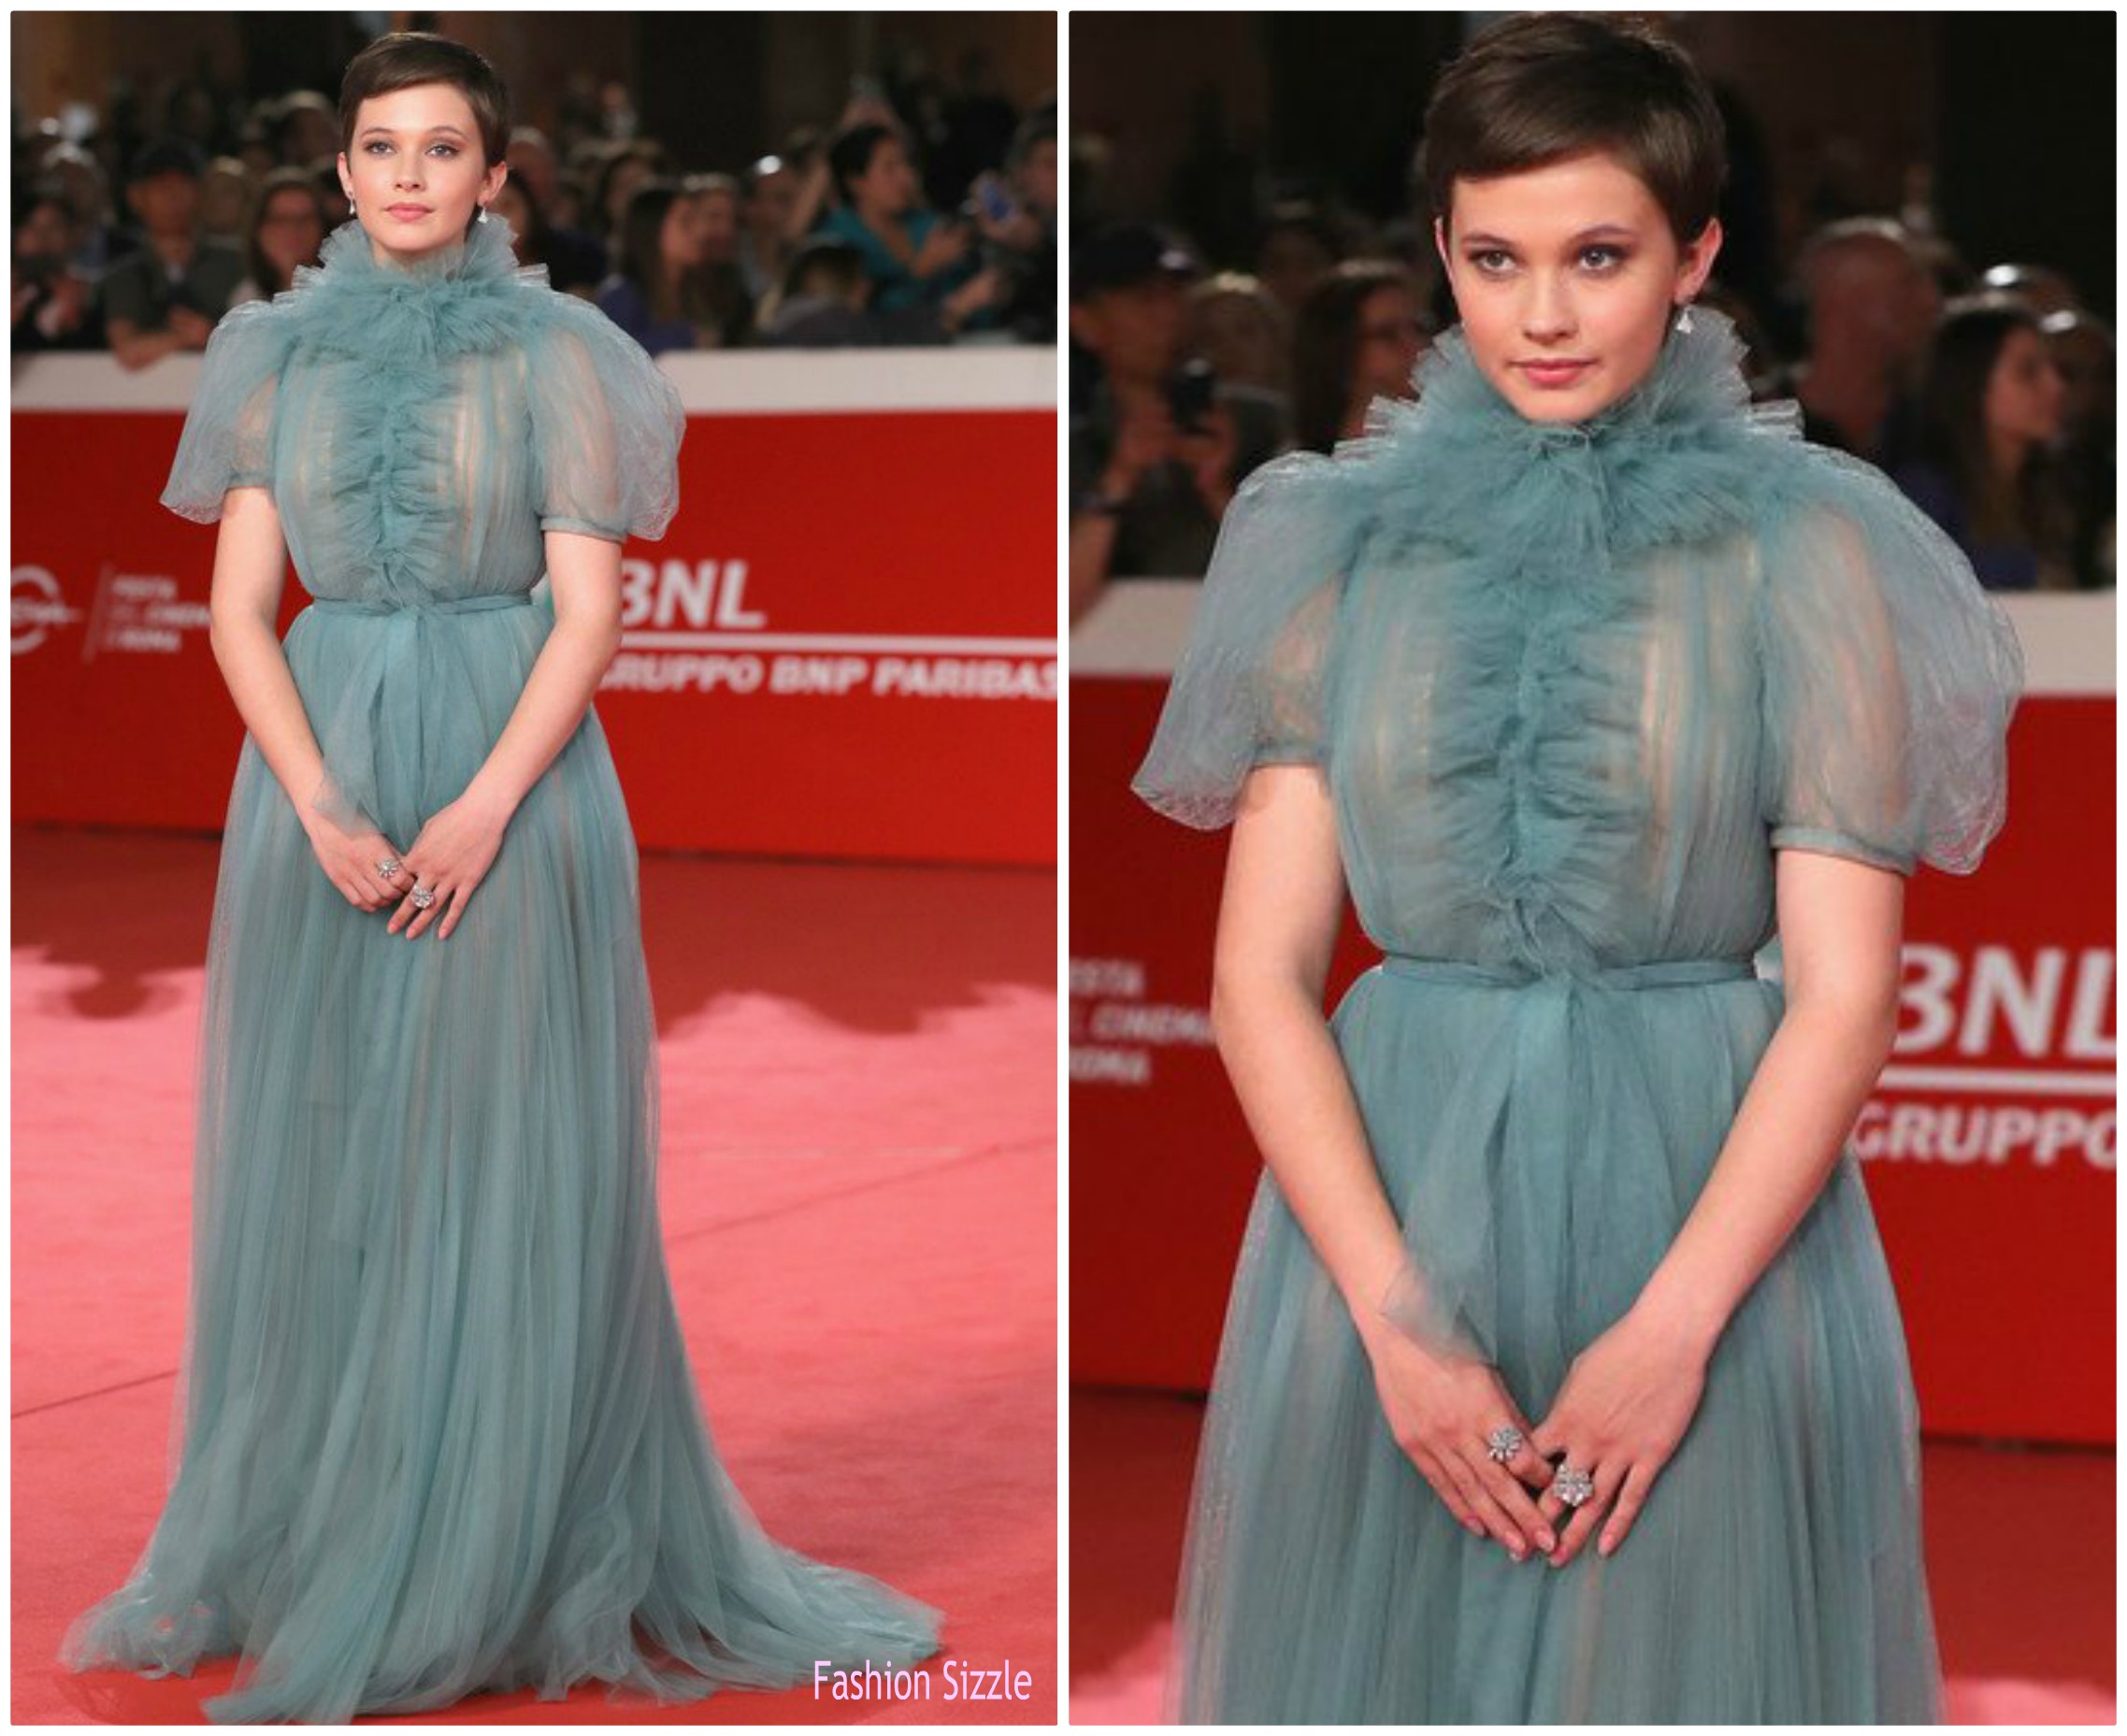 Cailee Spaeny In Valentino @ 'Bad Times at the El Royale' Rome Fi...